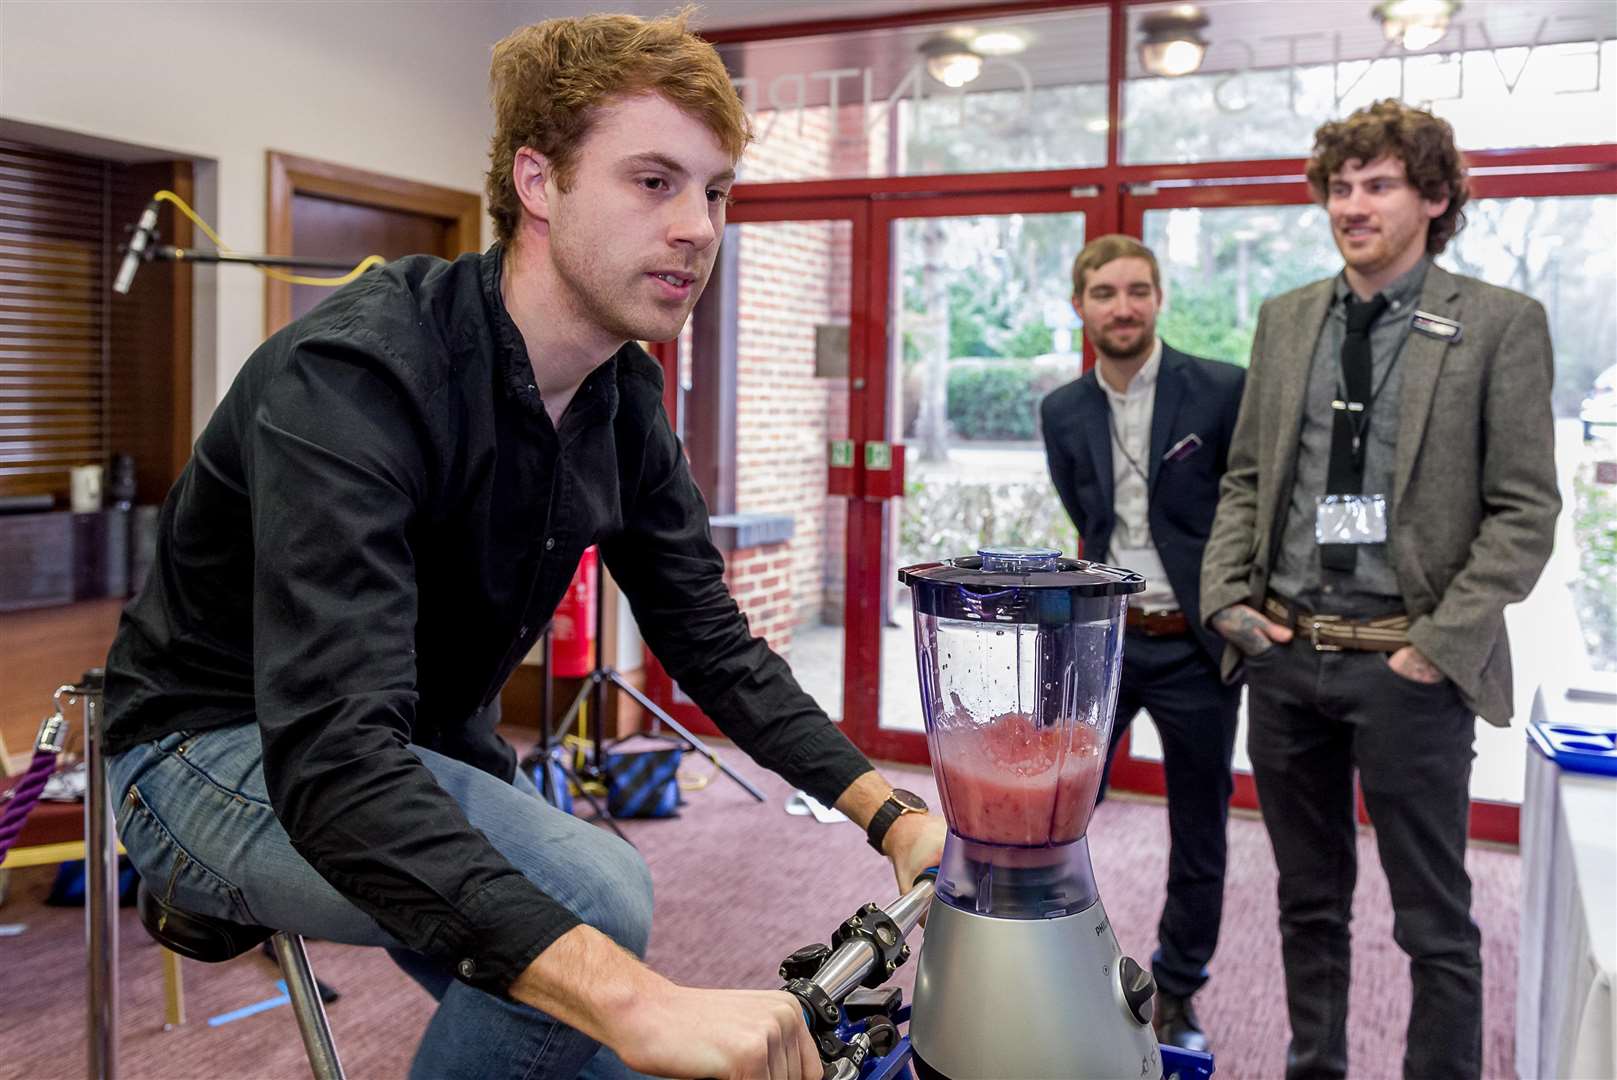 A delegate takes on the Smoothie Bike Challenge at the Wellbeing Symposium